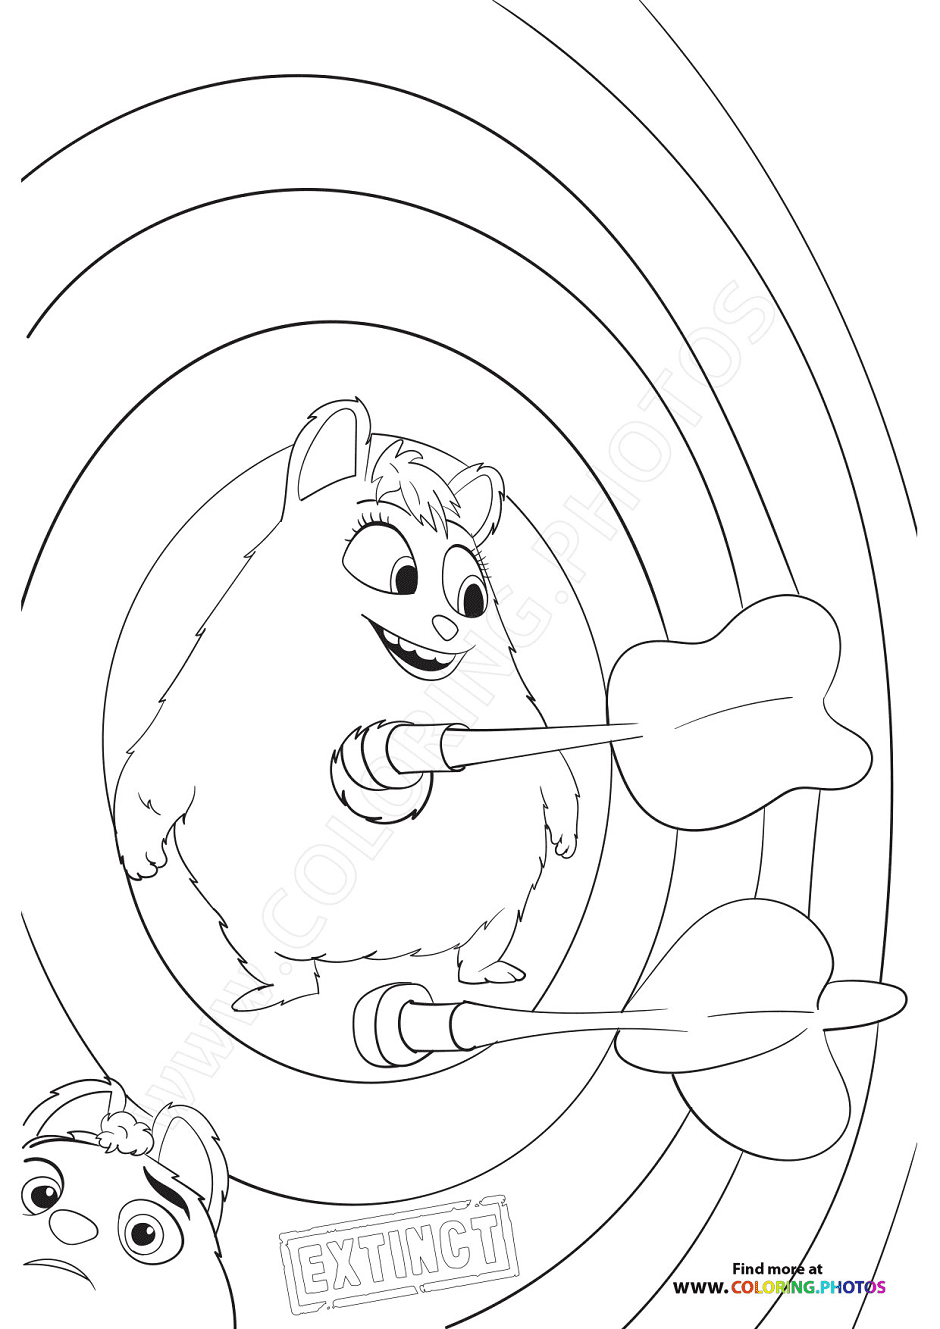 Ed with Op Coloring Page